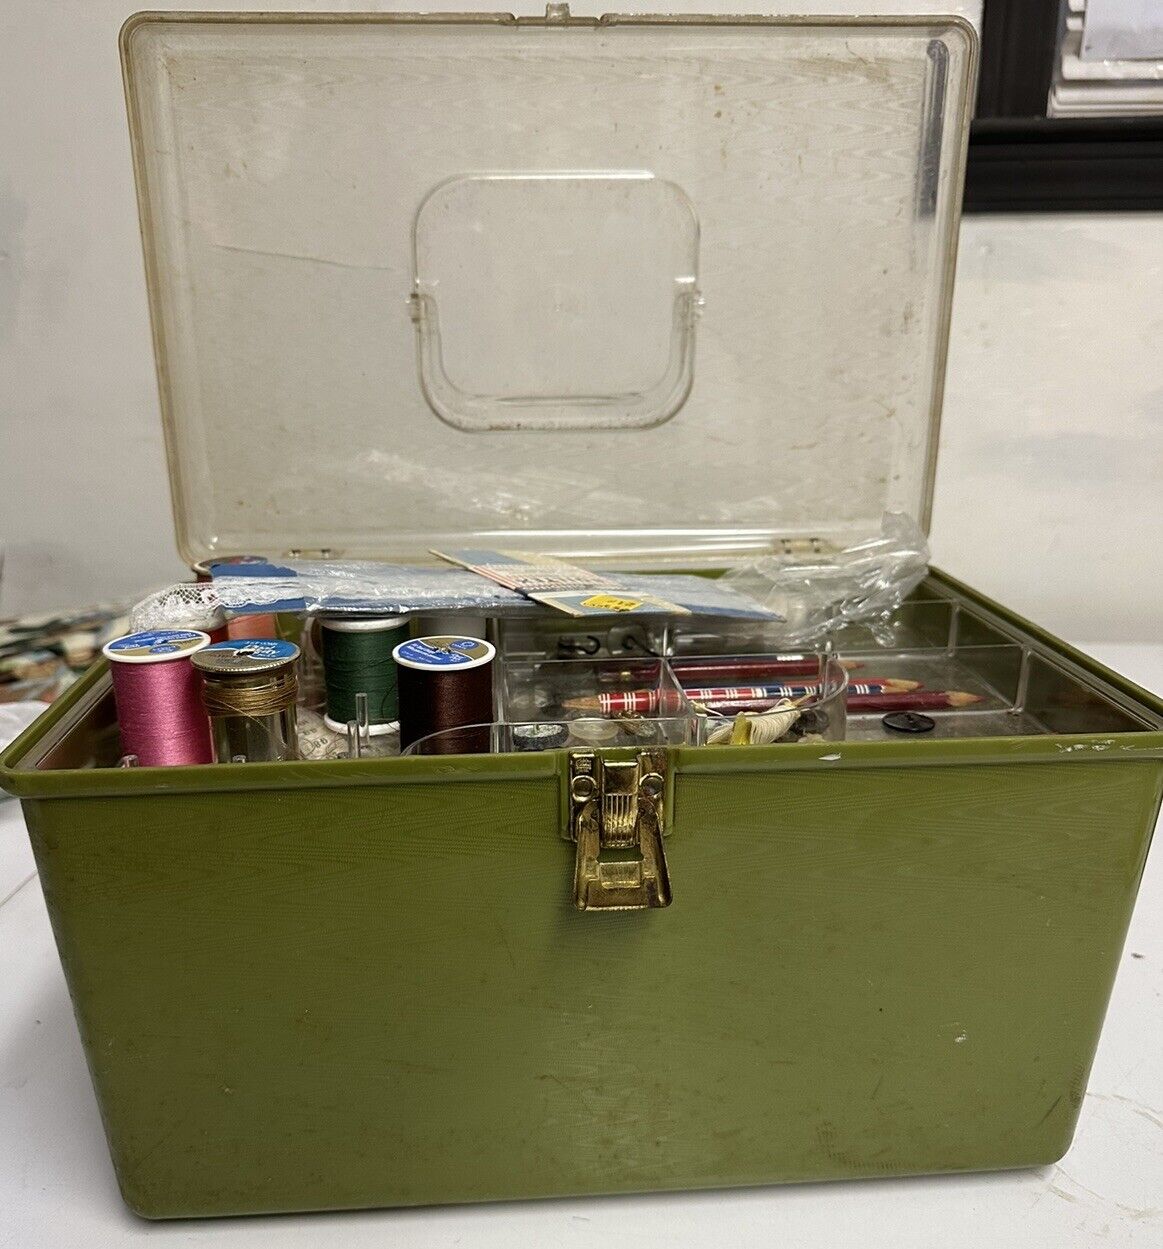 Vintage Wilson Wil-Hold Large Sewing Box Trunk Avacado Green w/ Sewing Supplies